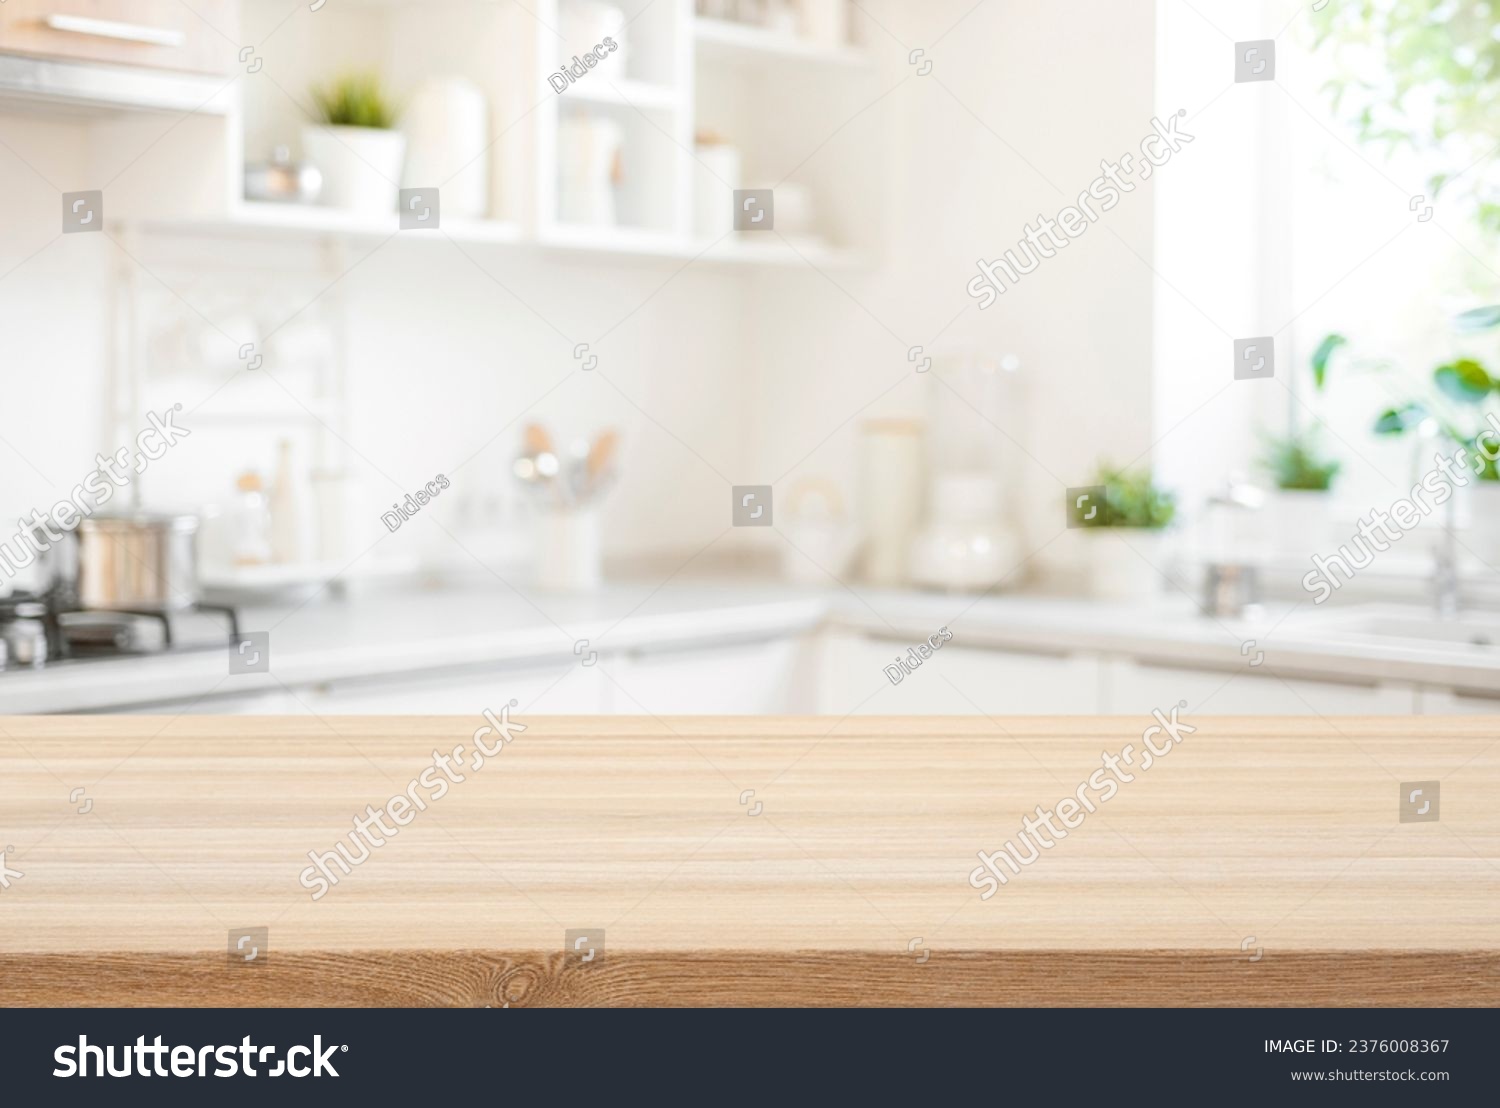 Wooden table top view for product montage over blurred kitchen interior background #2376008367